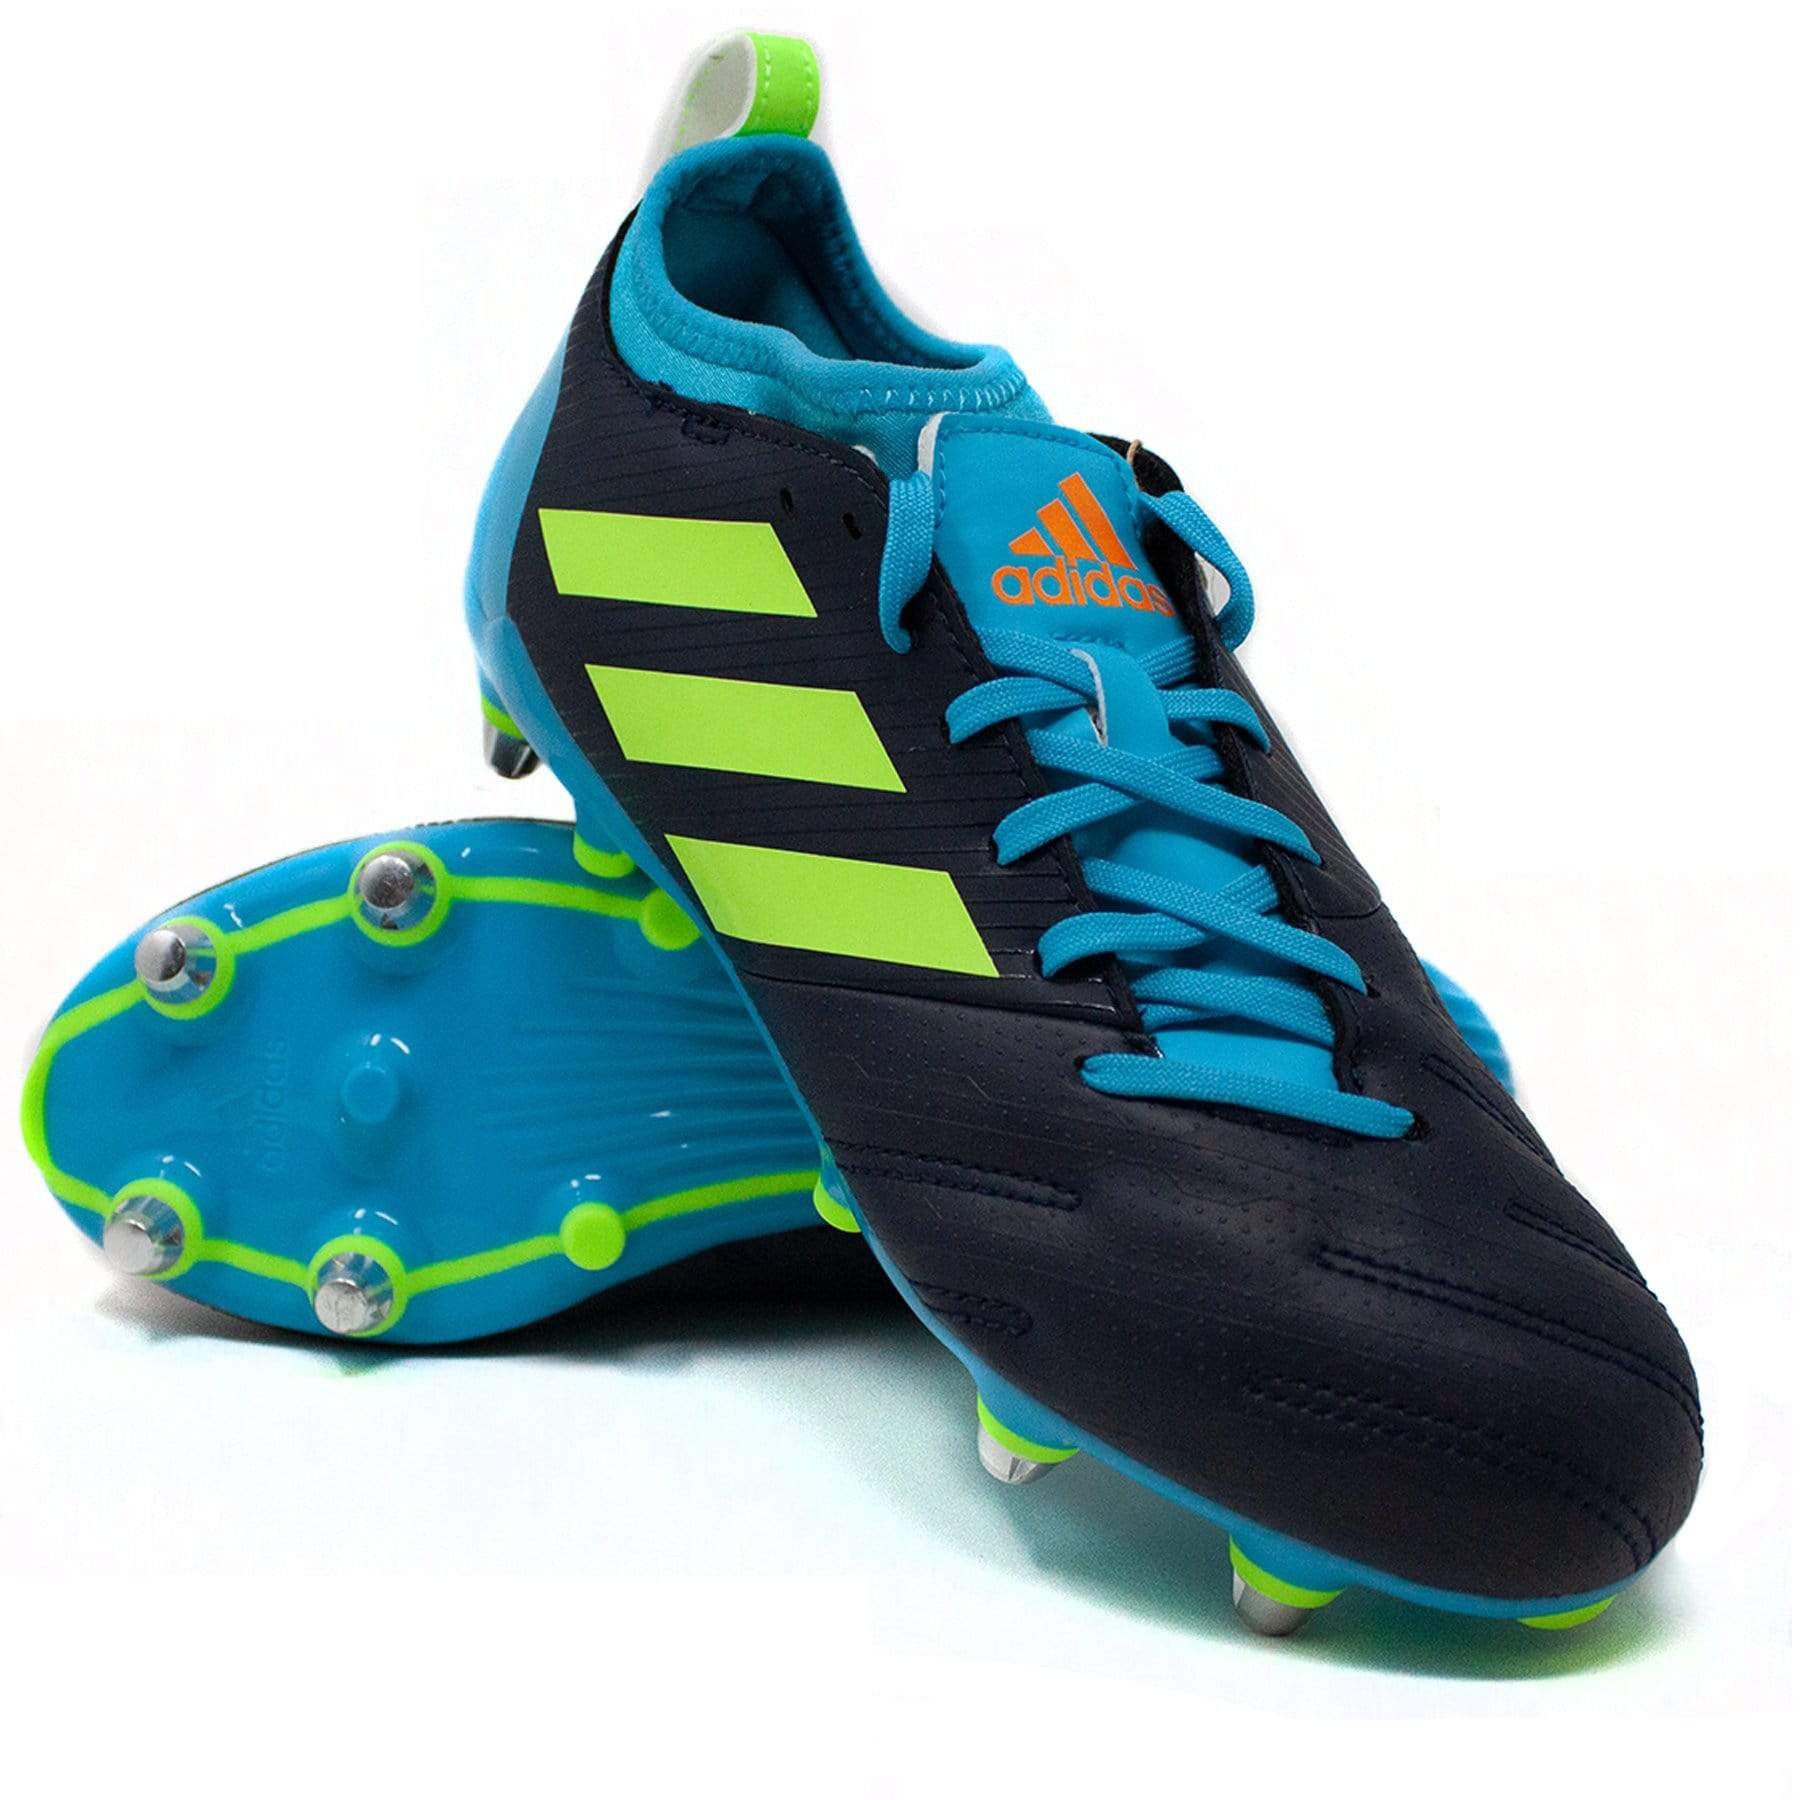 Adidas Malice Elite (SG) Boots - Ink - BOOTS